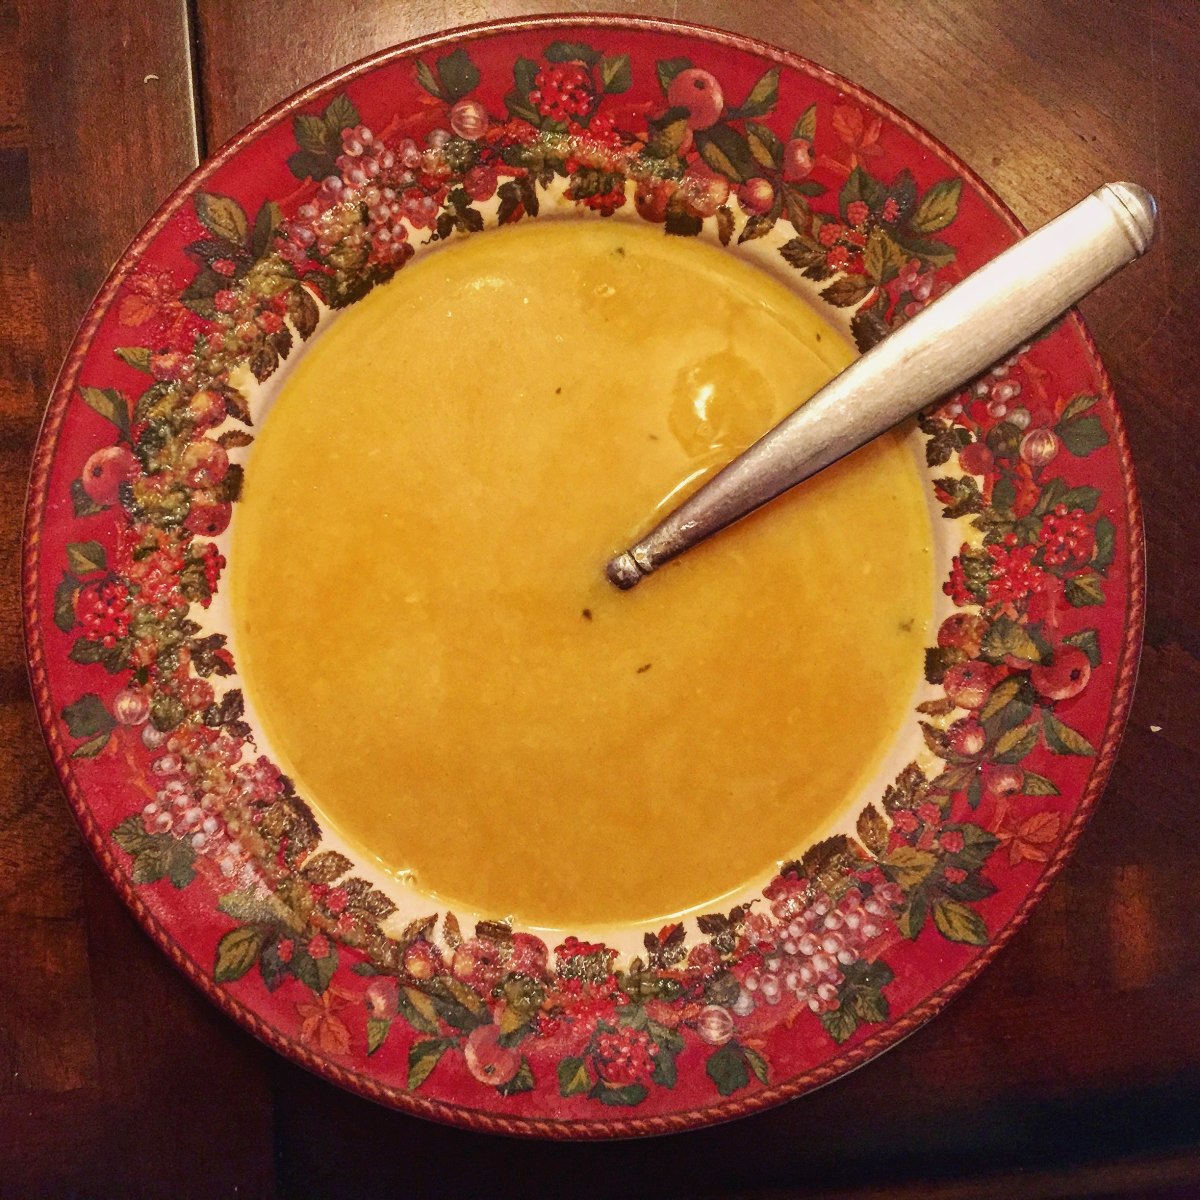 This soup looks even more delicious when placed in one of my grandmother's beautiful old soup bowls!